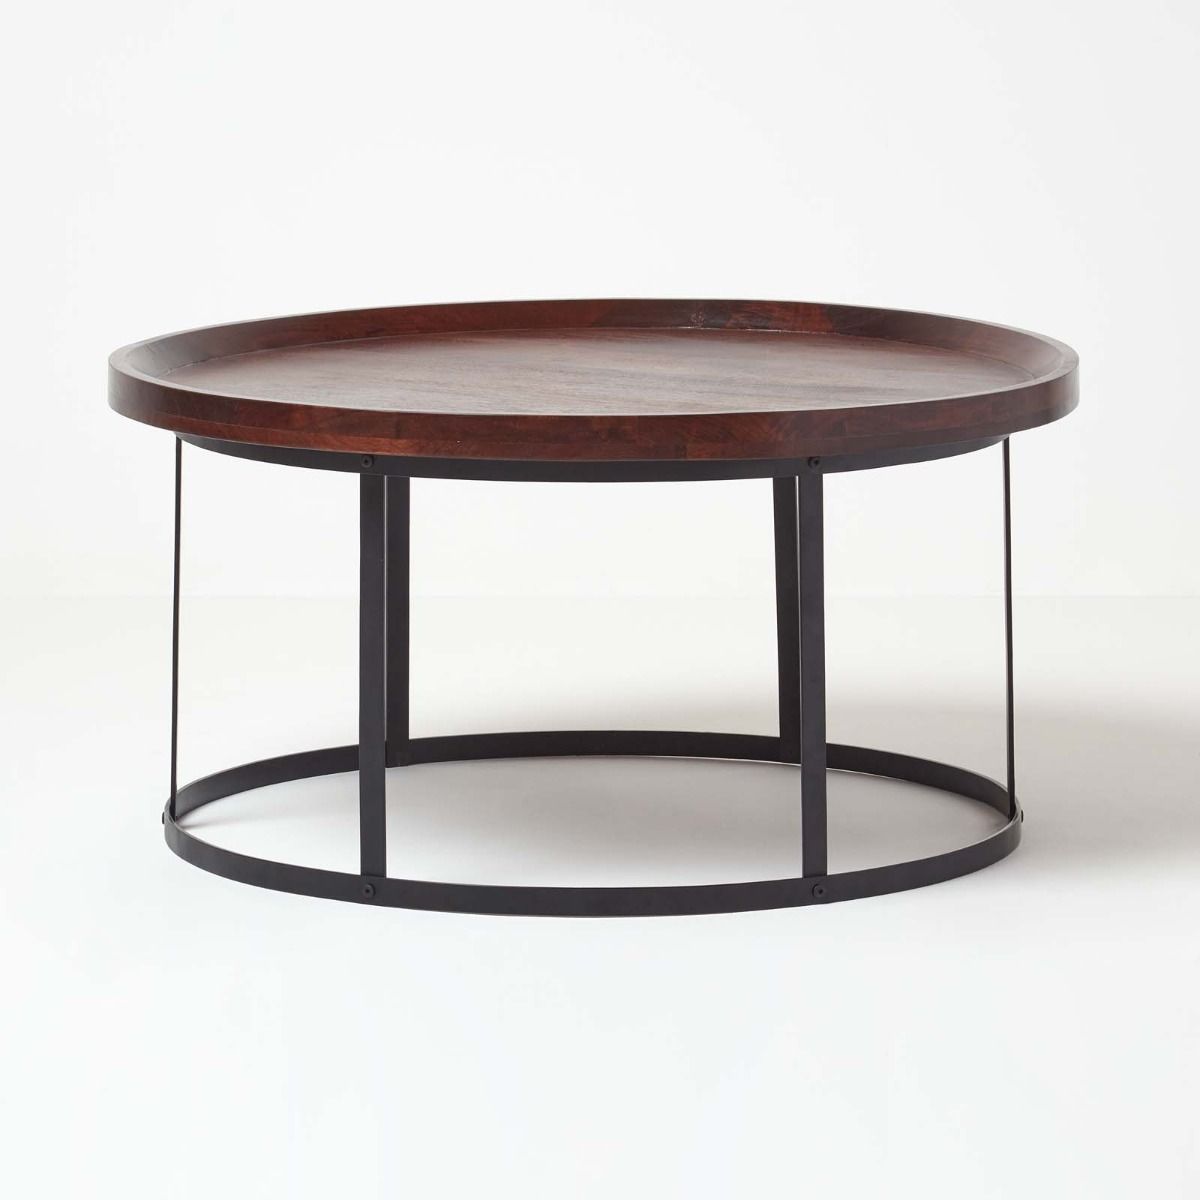 Industrial Round Coffee Table With Dark, Round Dark Wooden Coffee Table